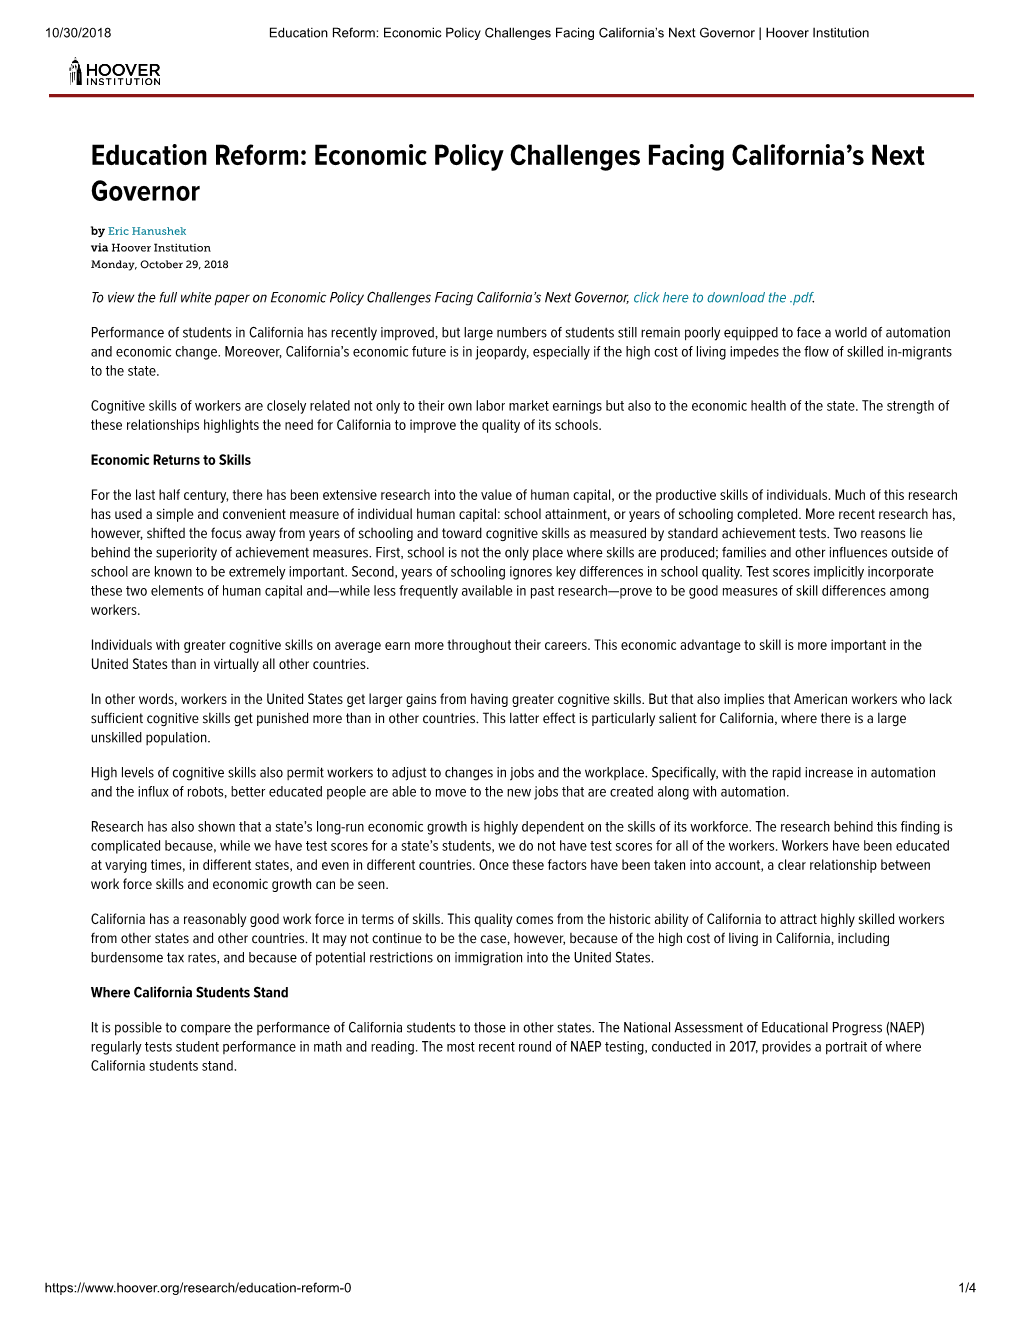 Education Reform: Economic Policy Challenges Facing California's Next